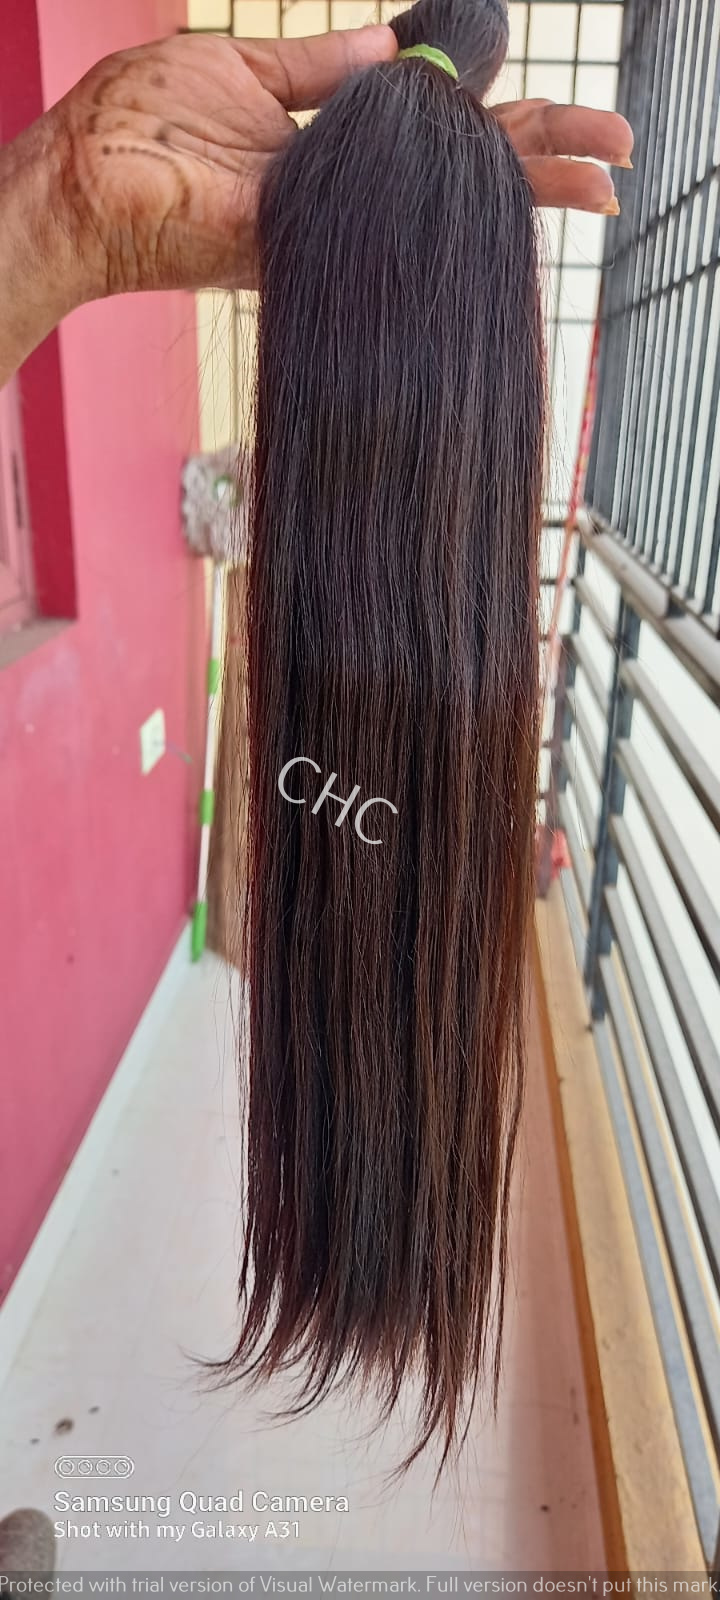 Bouncy And Soft Straight Indian Human Hair Extensions